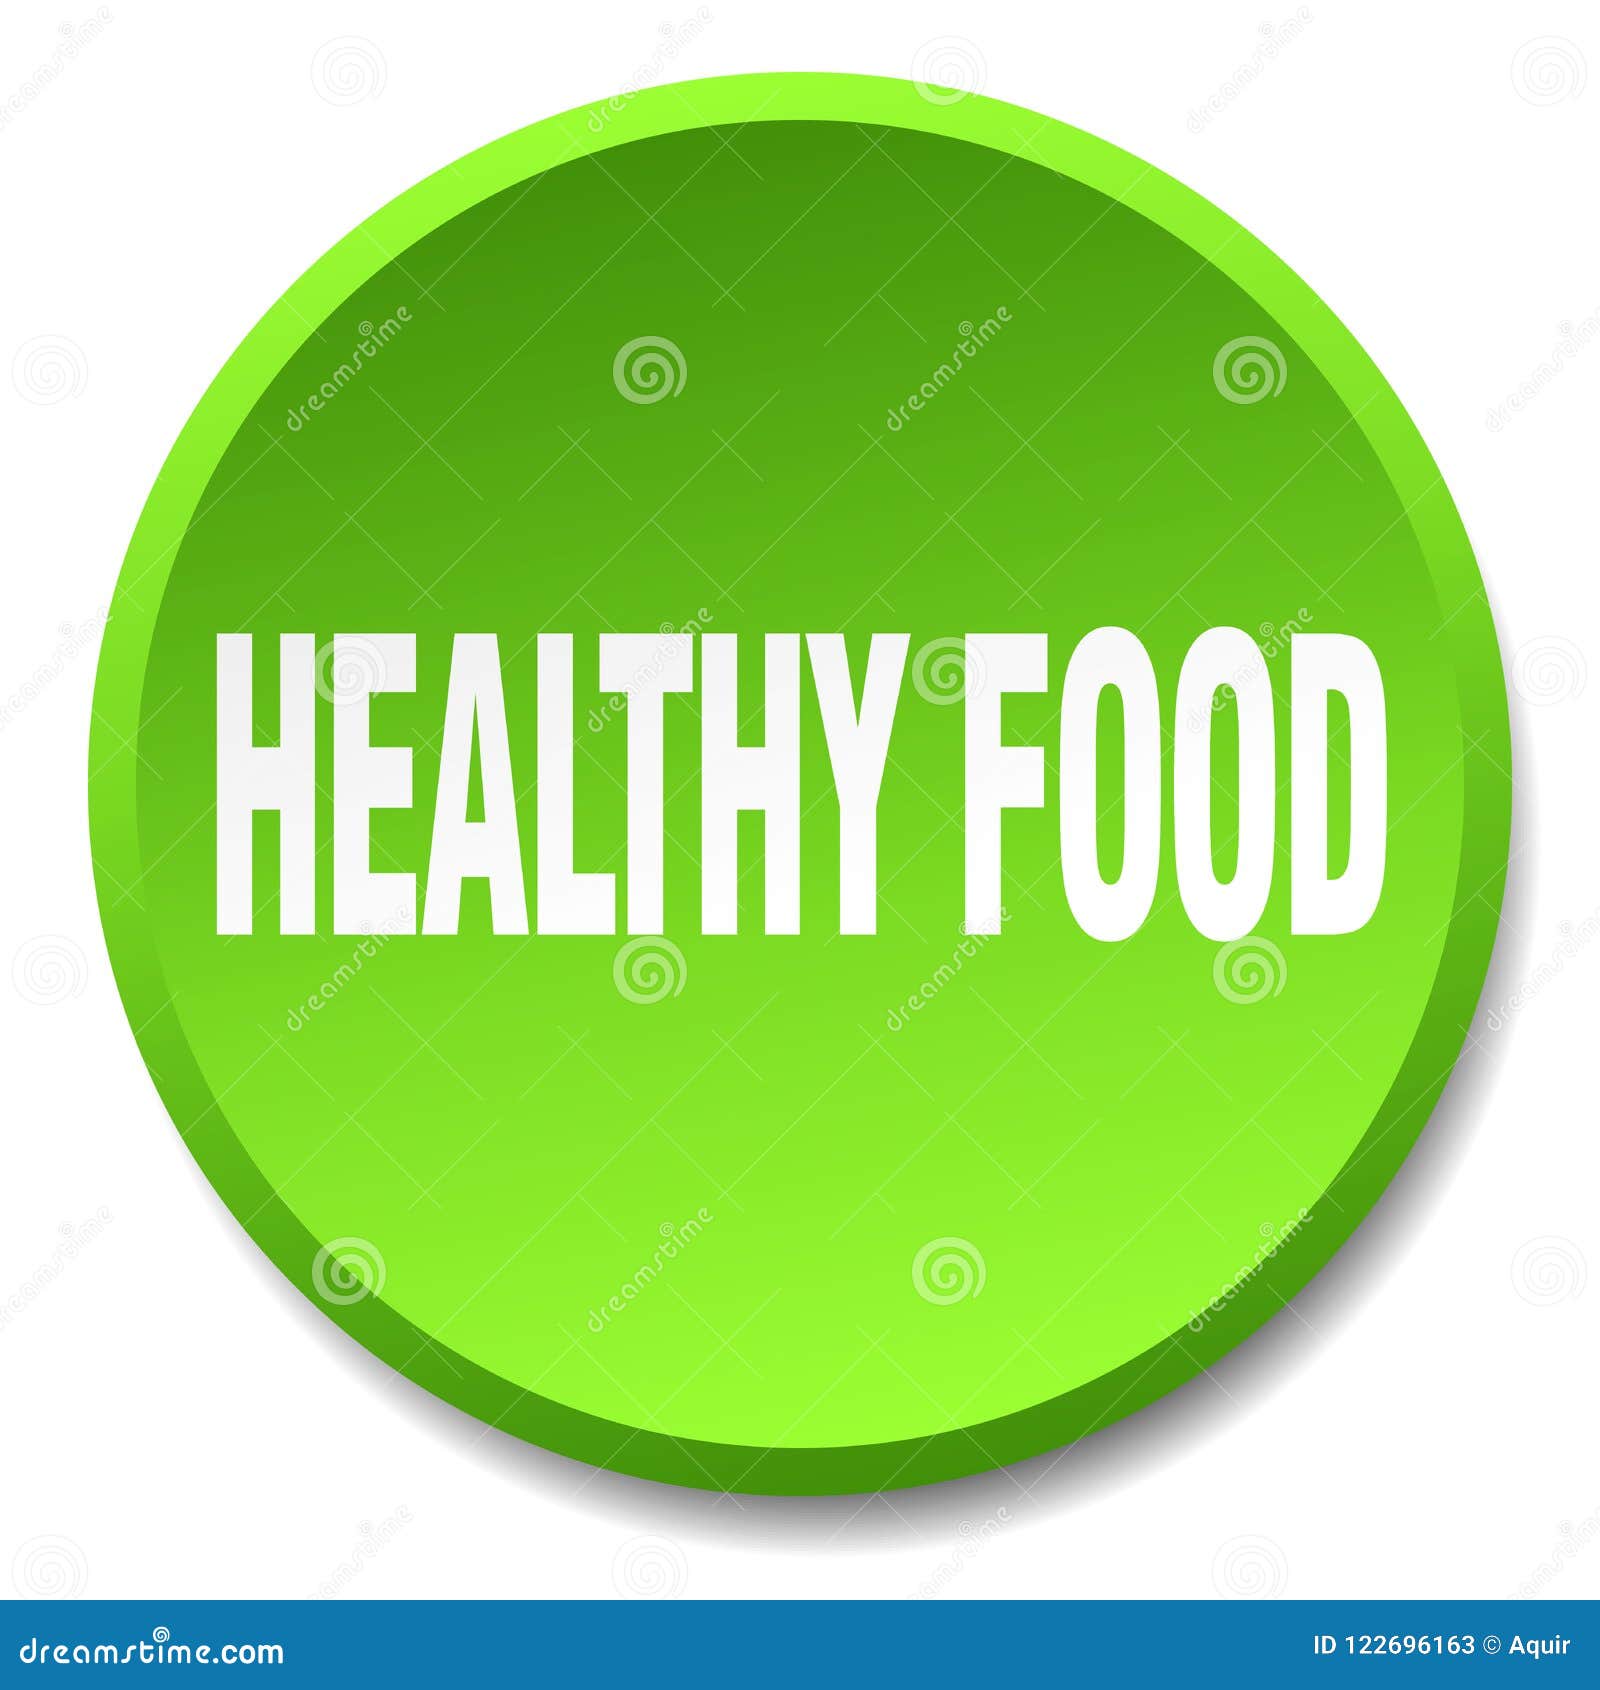 Healthy food button stock vector. Illustration of glossy - 122696163